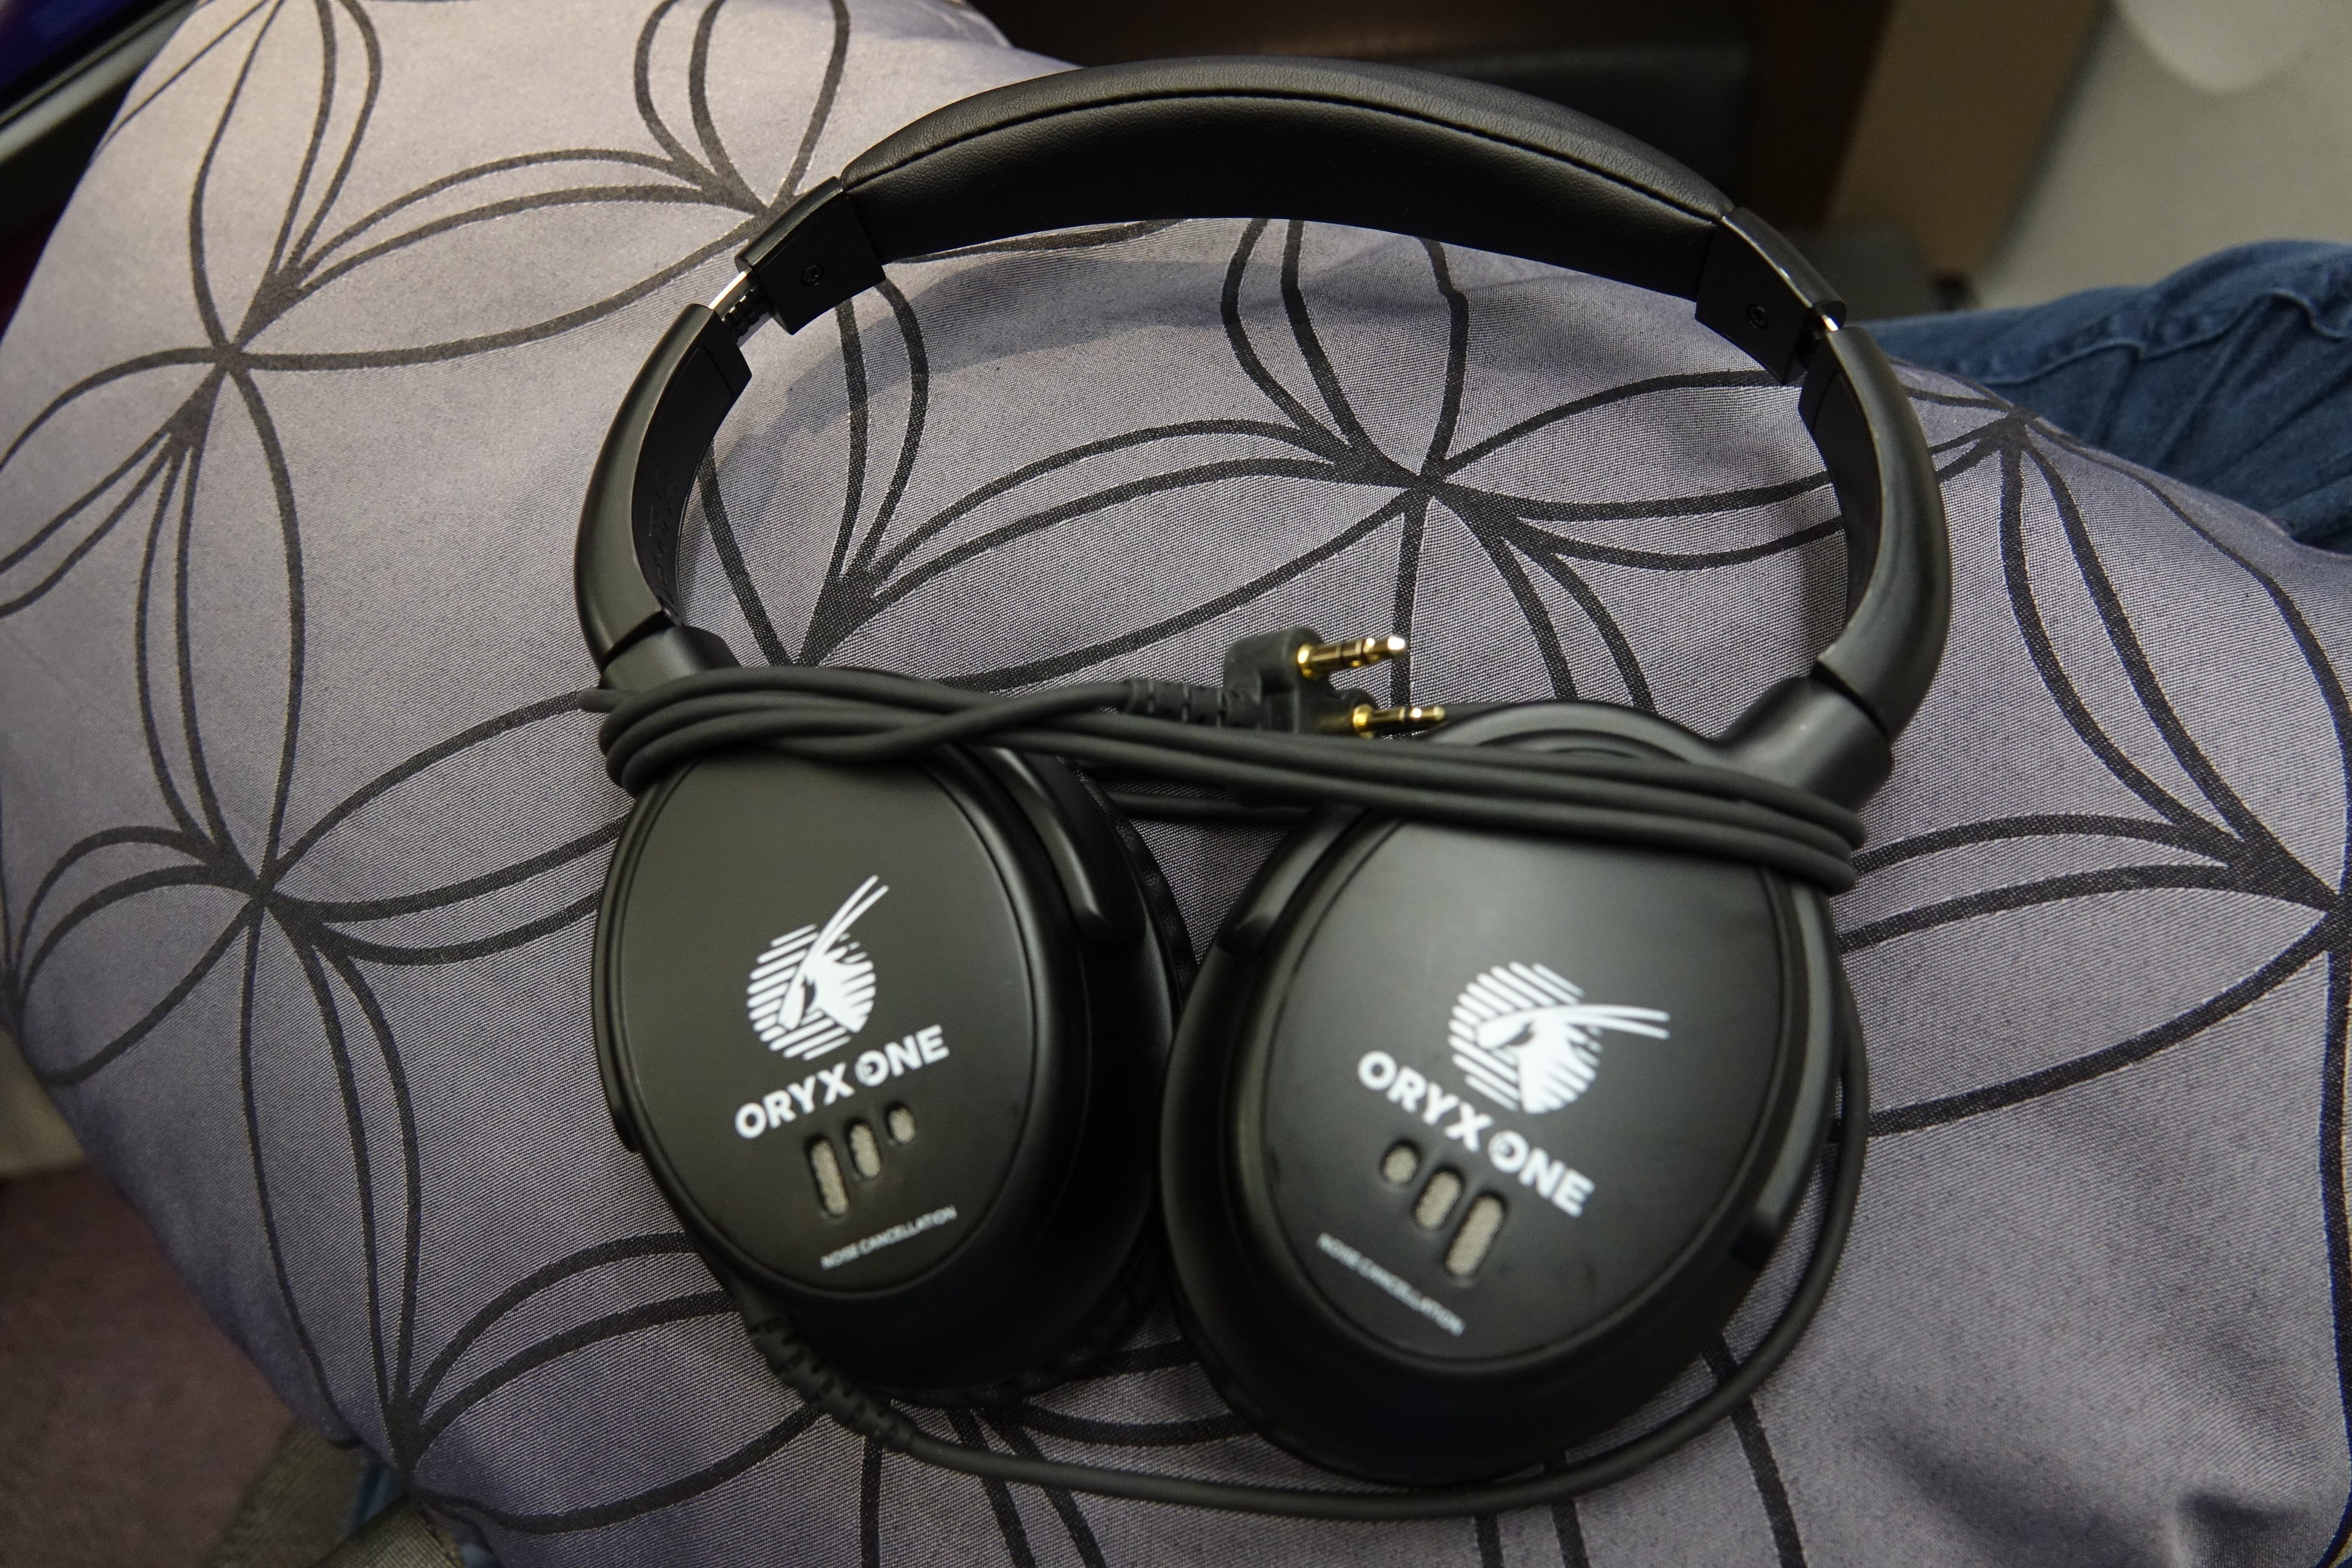 a pair of black headphones on a grey patterned surface